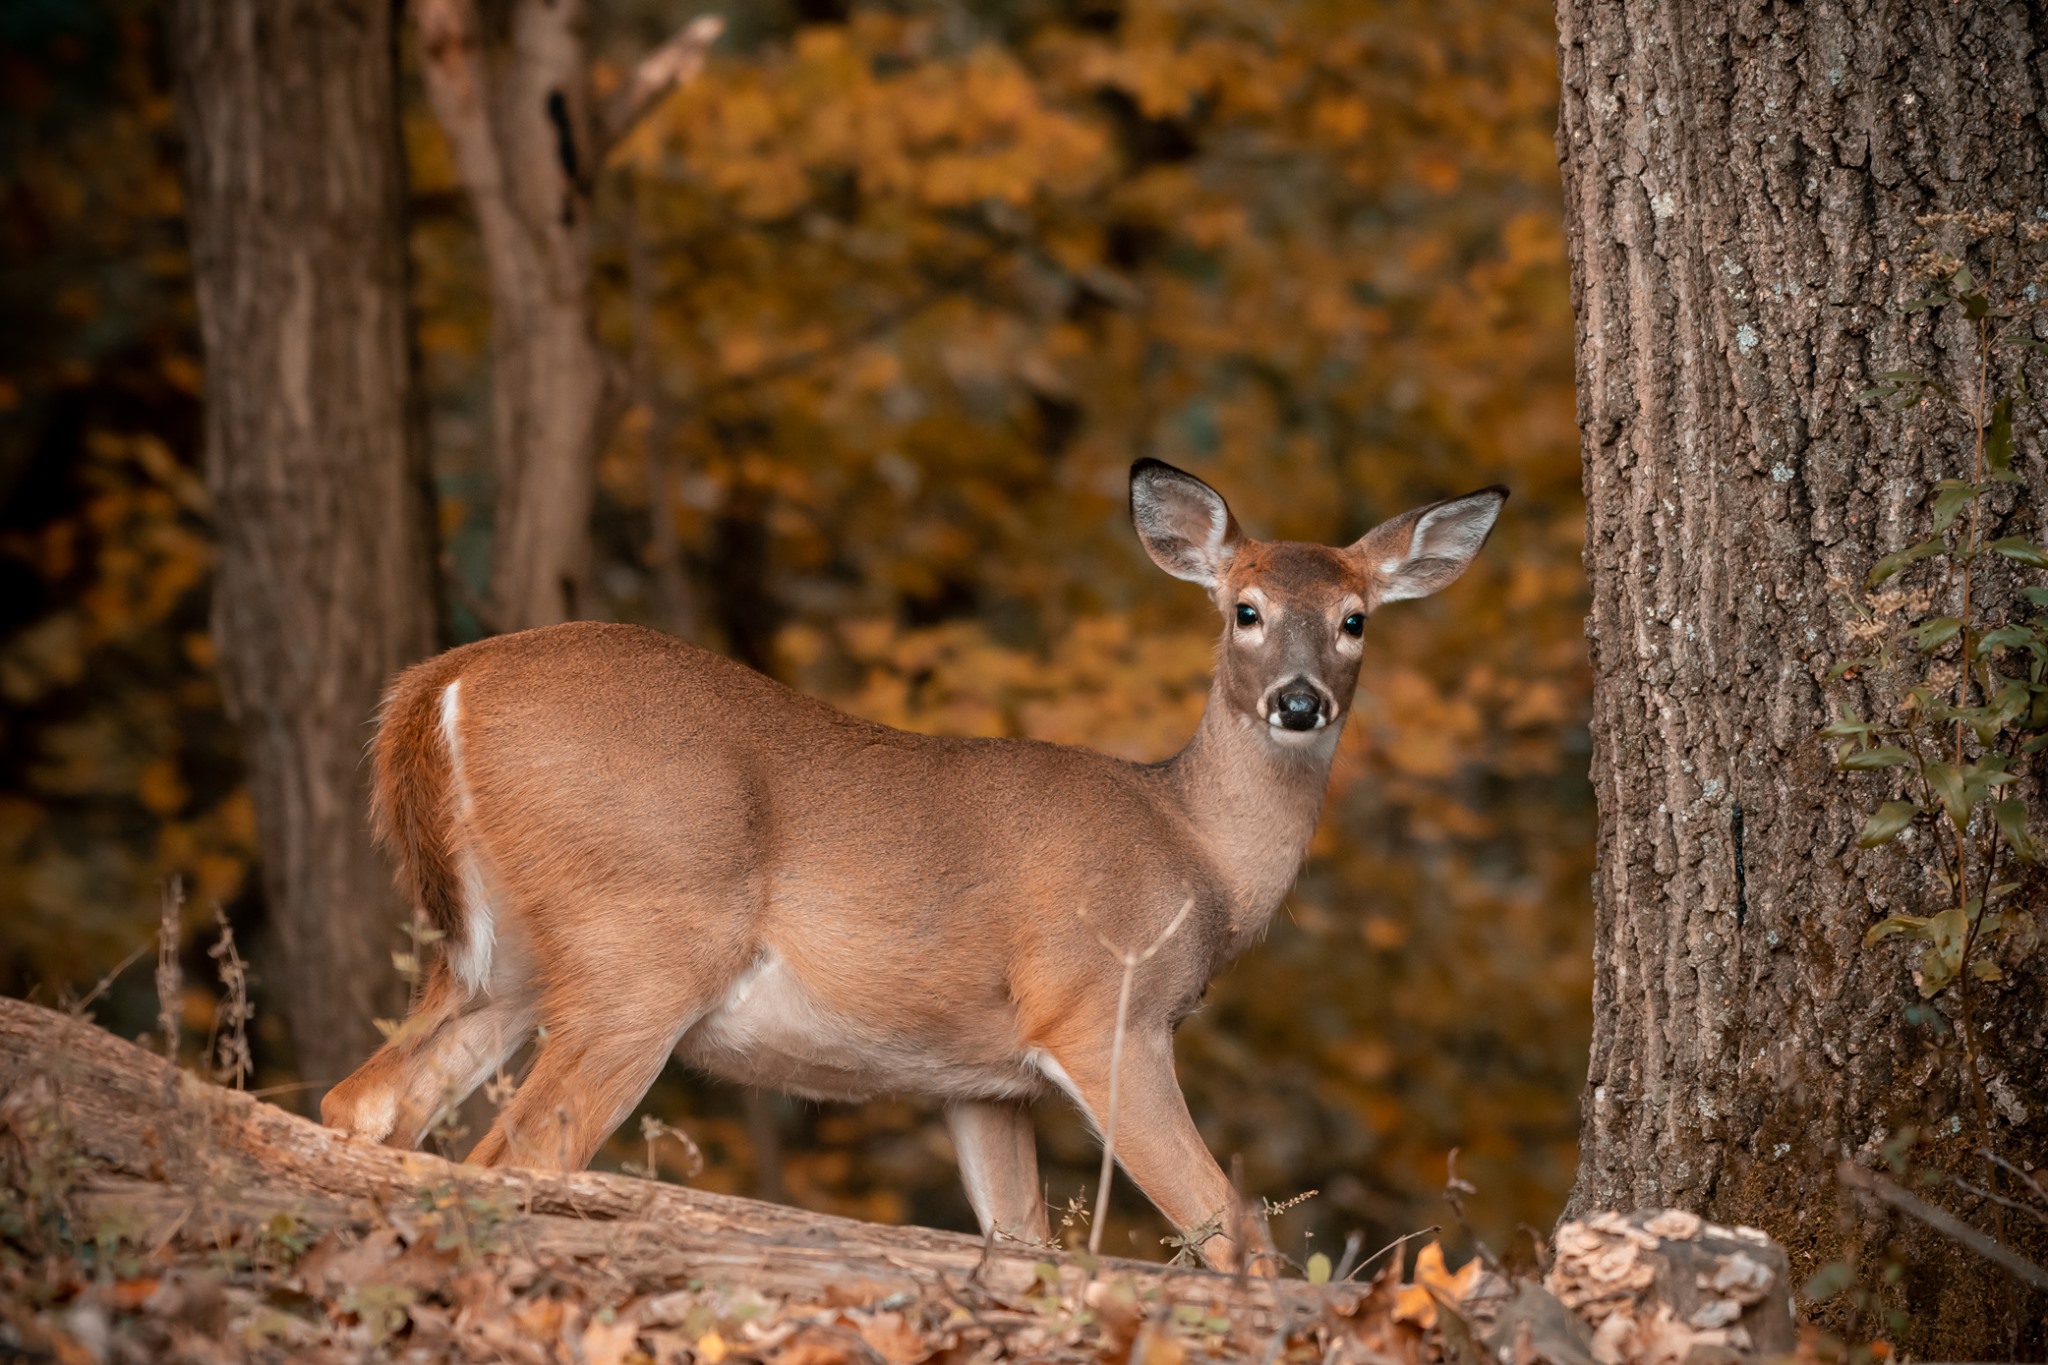 The first of several antlerless hunting opportunities comes this week